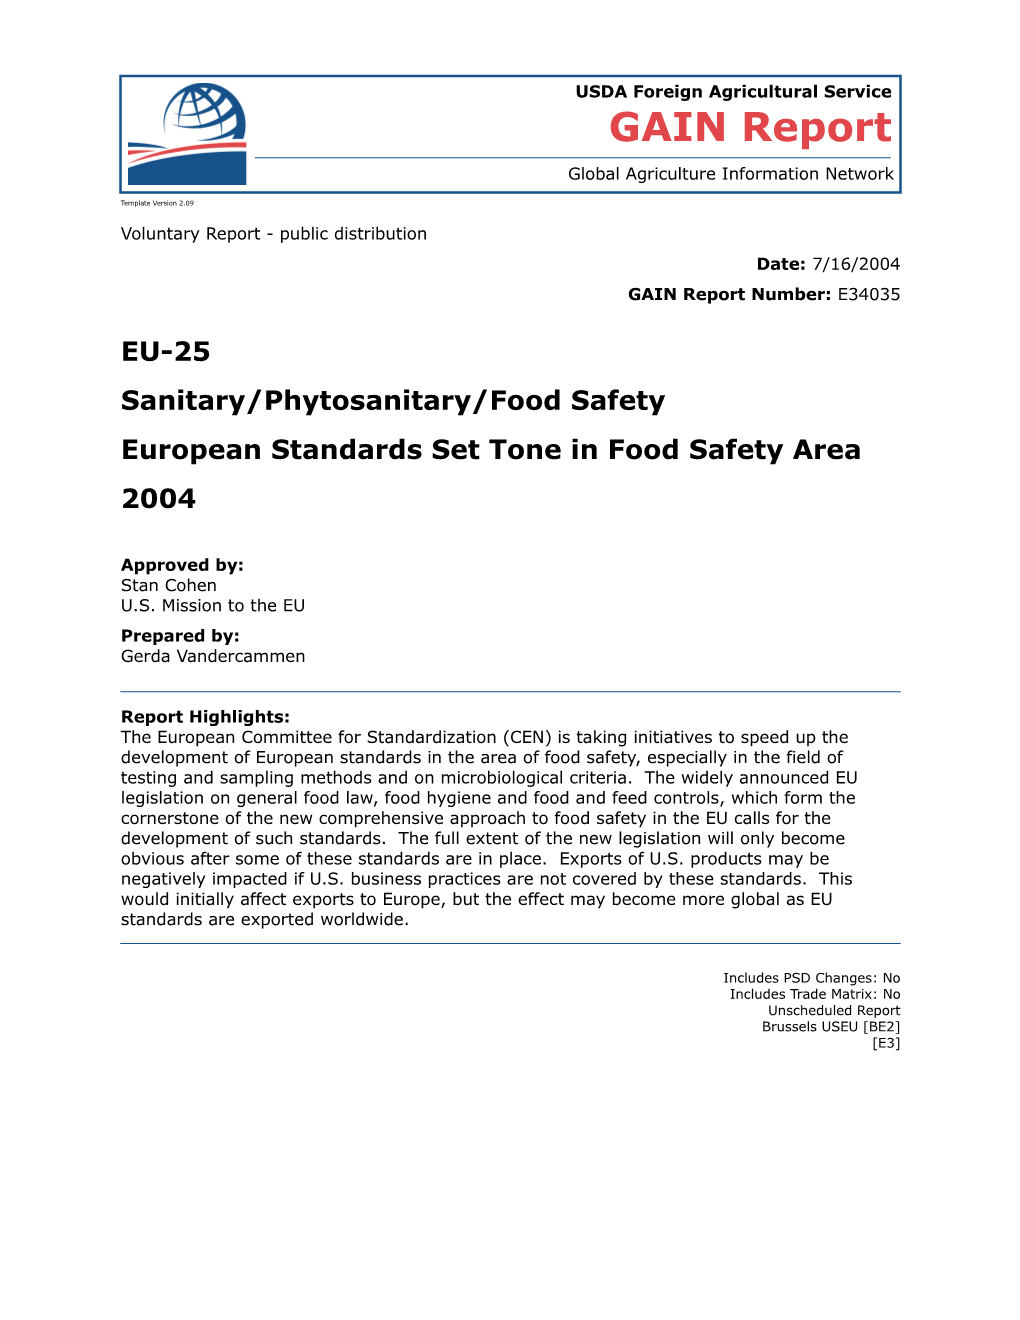 European Standards Set Tone in Food Safety Area